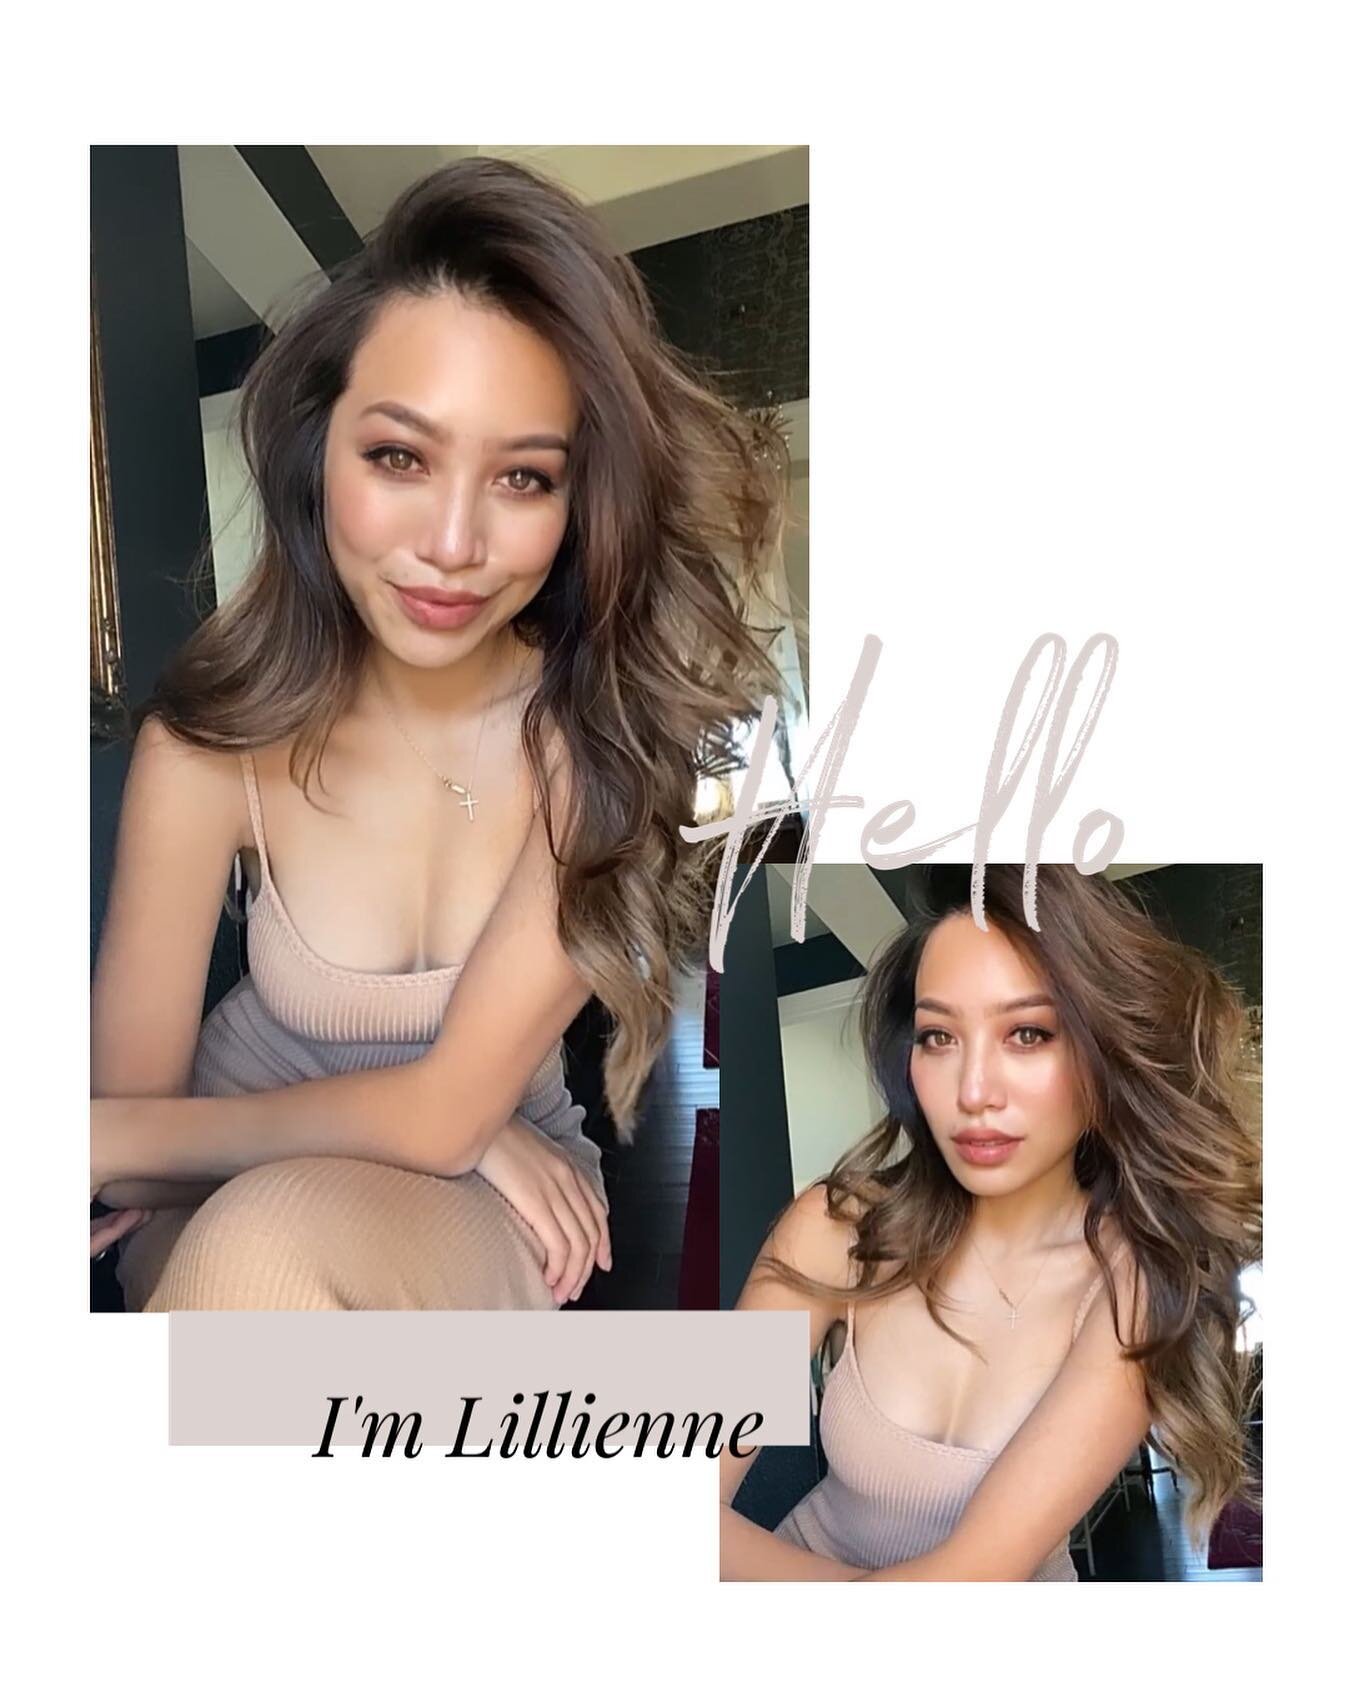 Hello!! I&rsquo;m LILLIENNE 😊 Thank You for following me and my journey. I started my website THELillienne.com + my blog as a creative outlet but my goal is to inspire you, awaken your soul, encourage you to venture outside of your comfort level, op